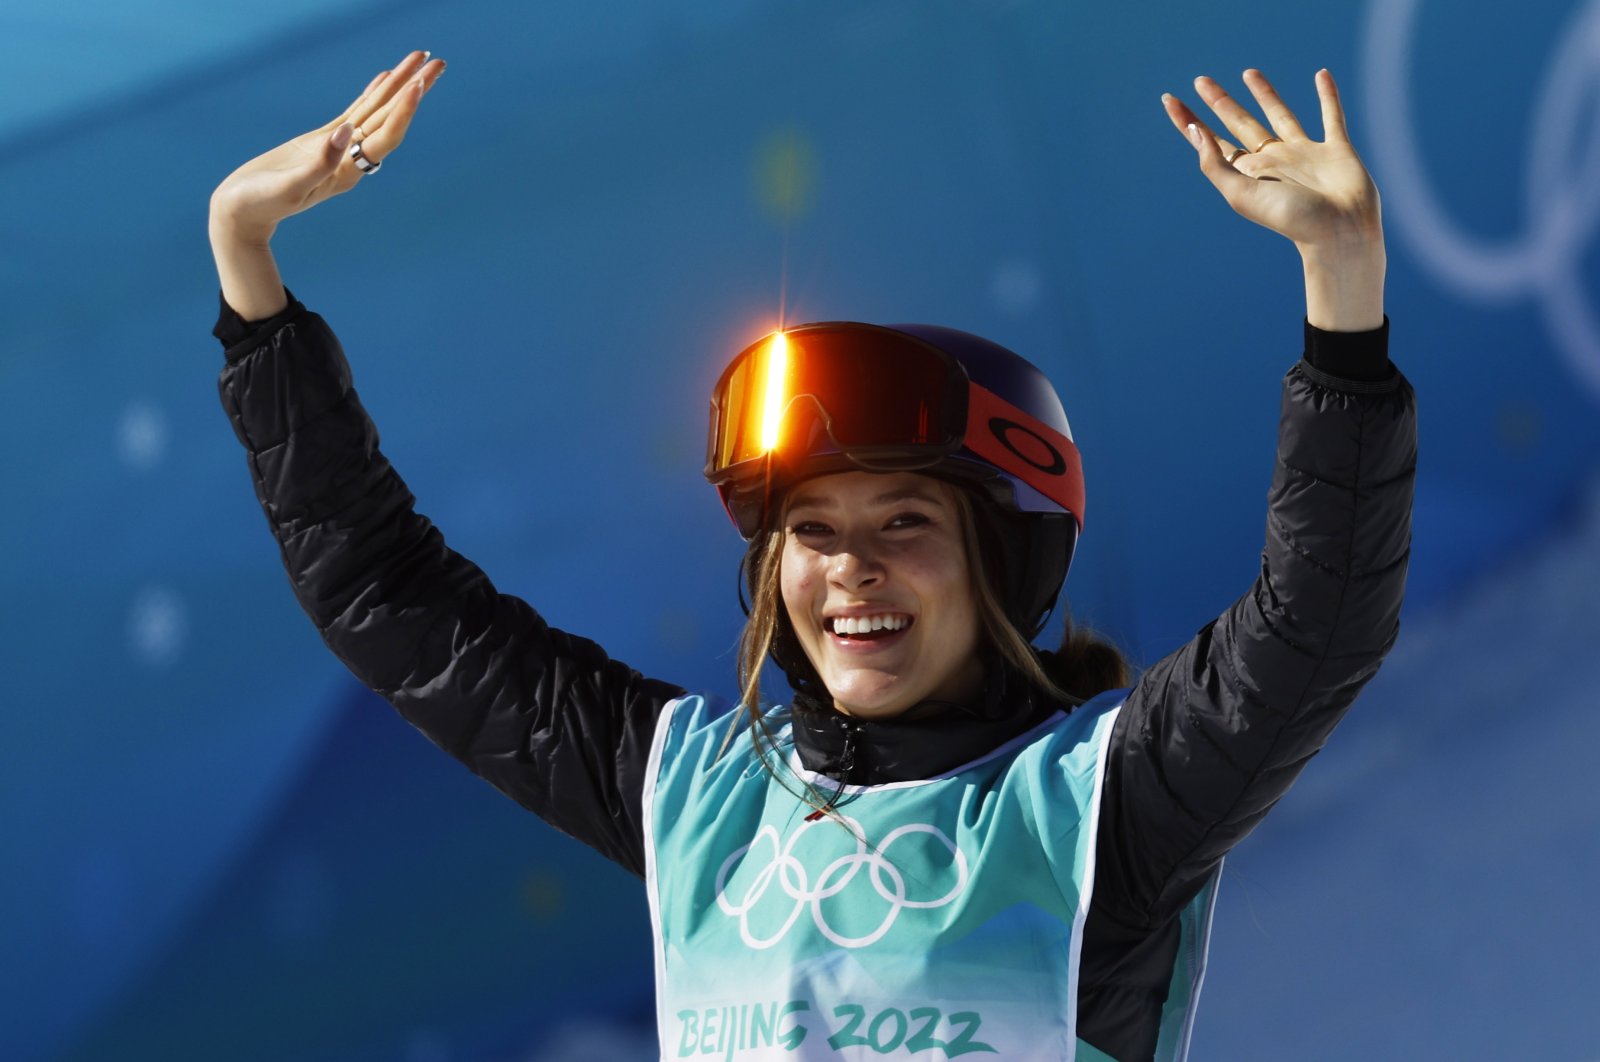 snowboarding at the 2022 winter olympics – women's slopestyle